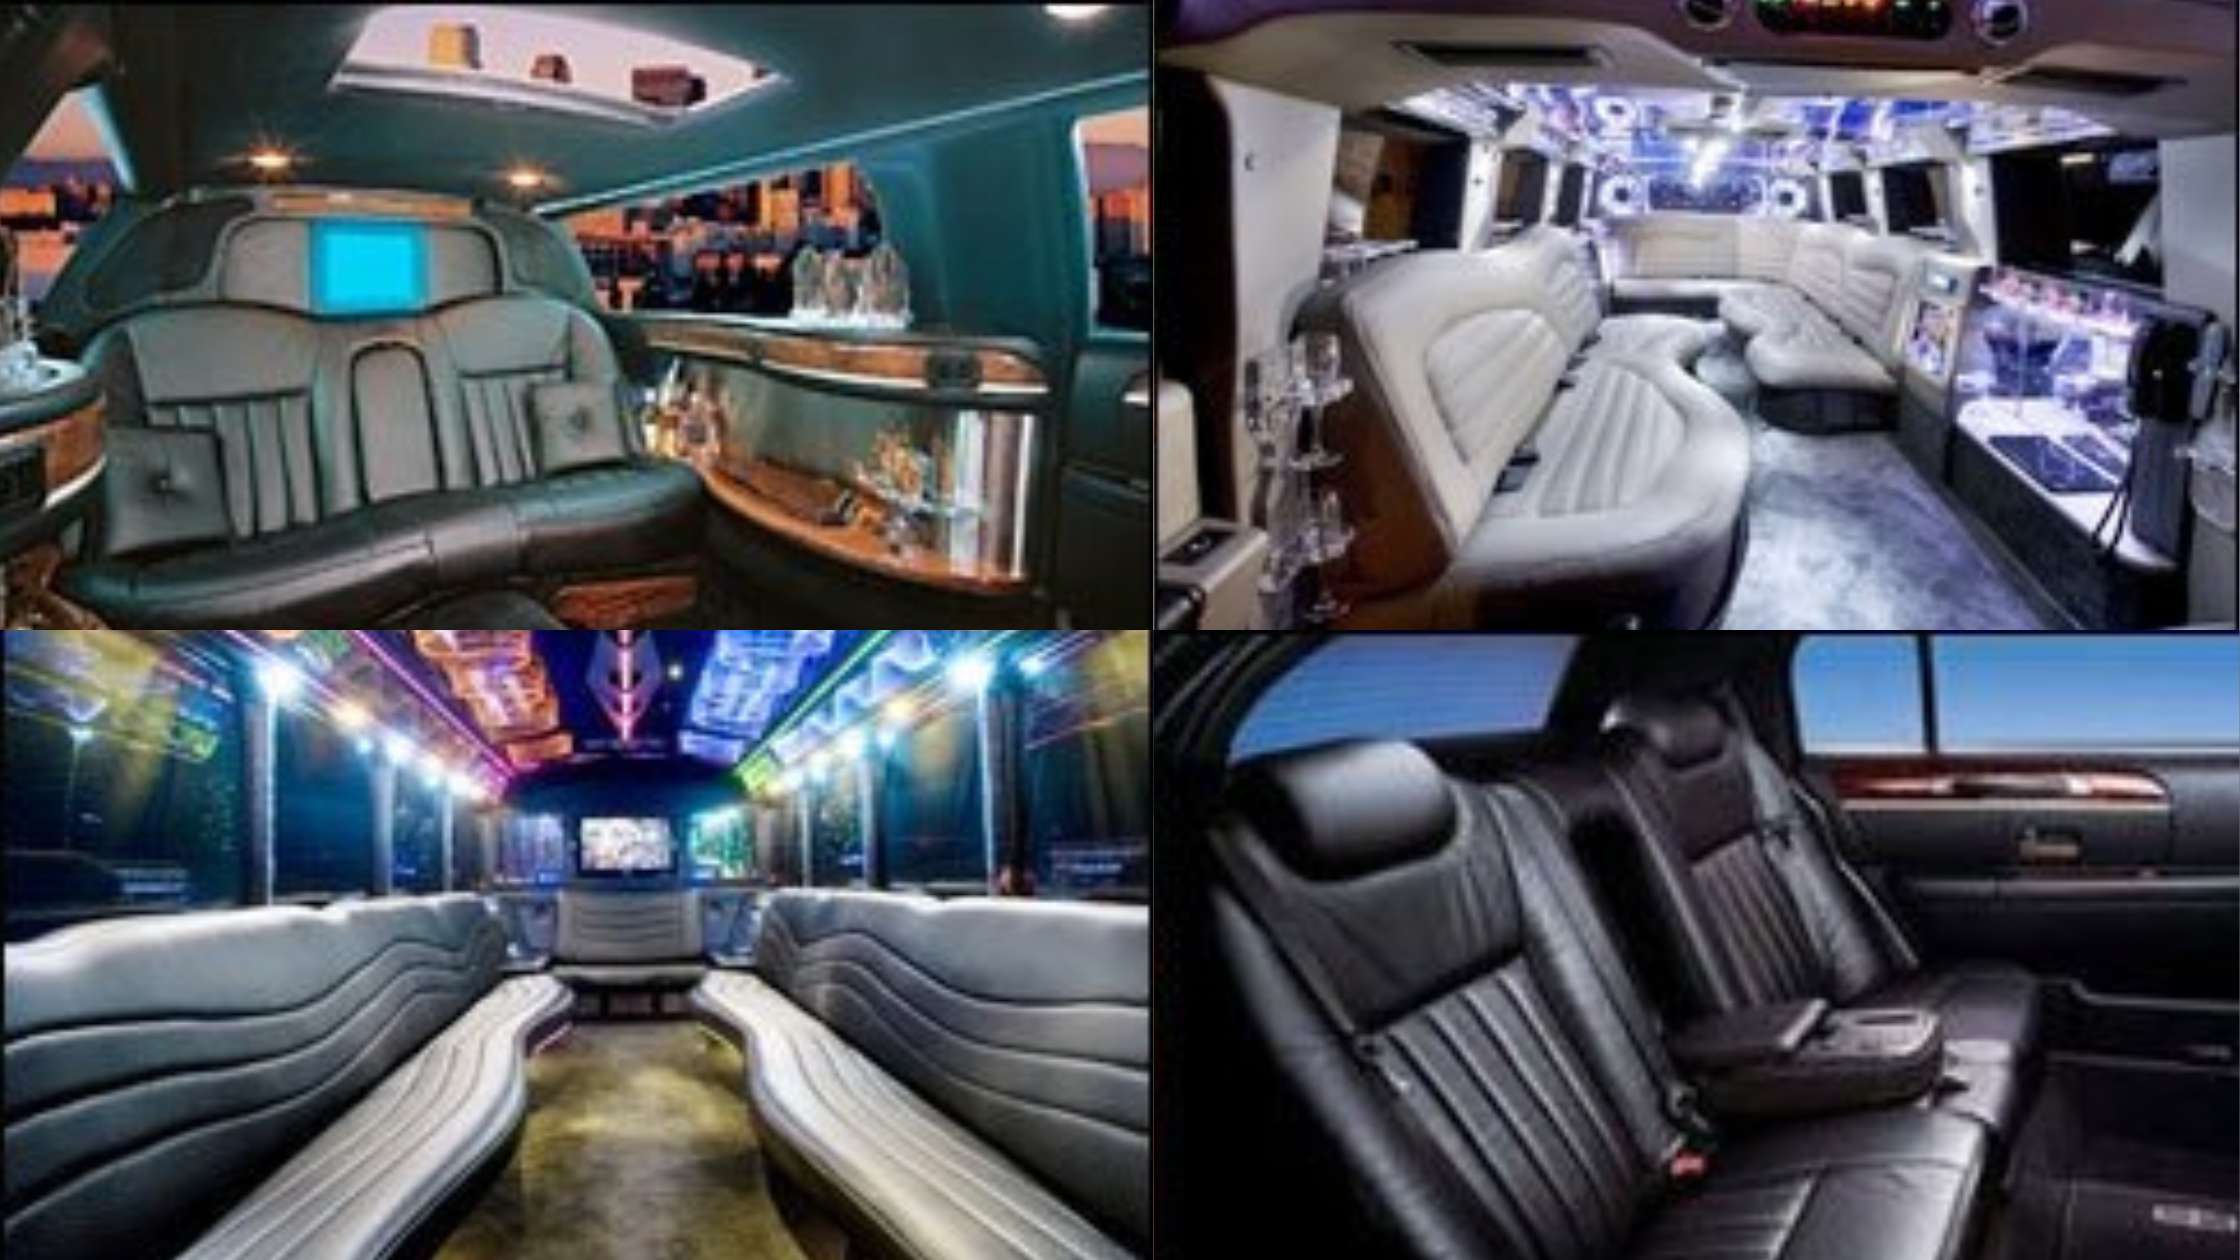 5 best interior features of a private limousine